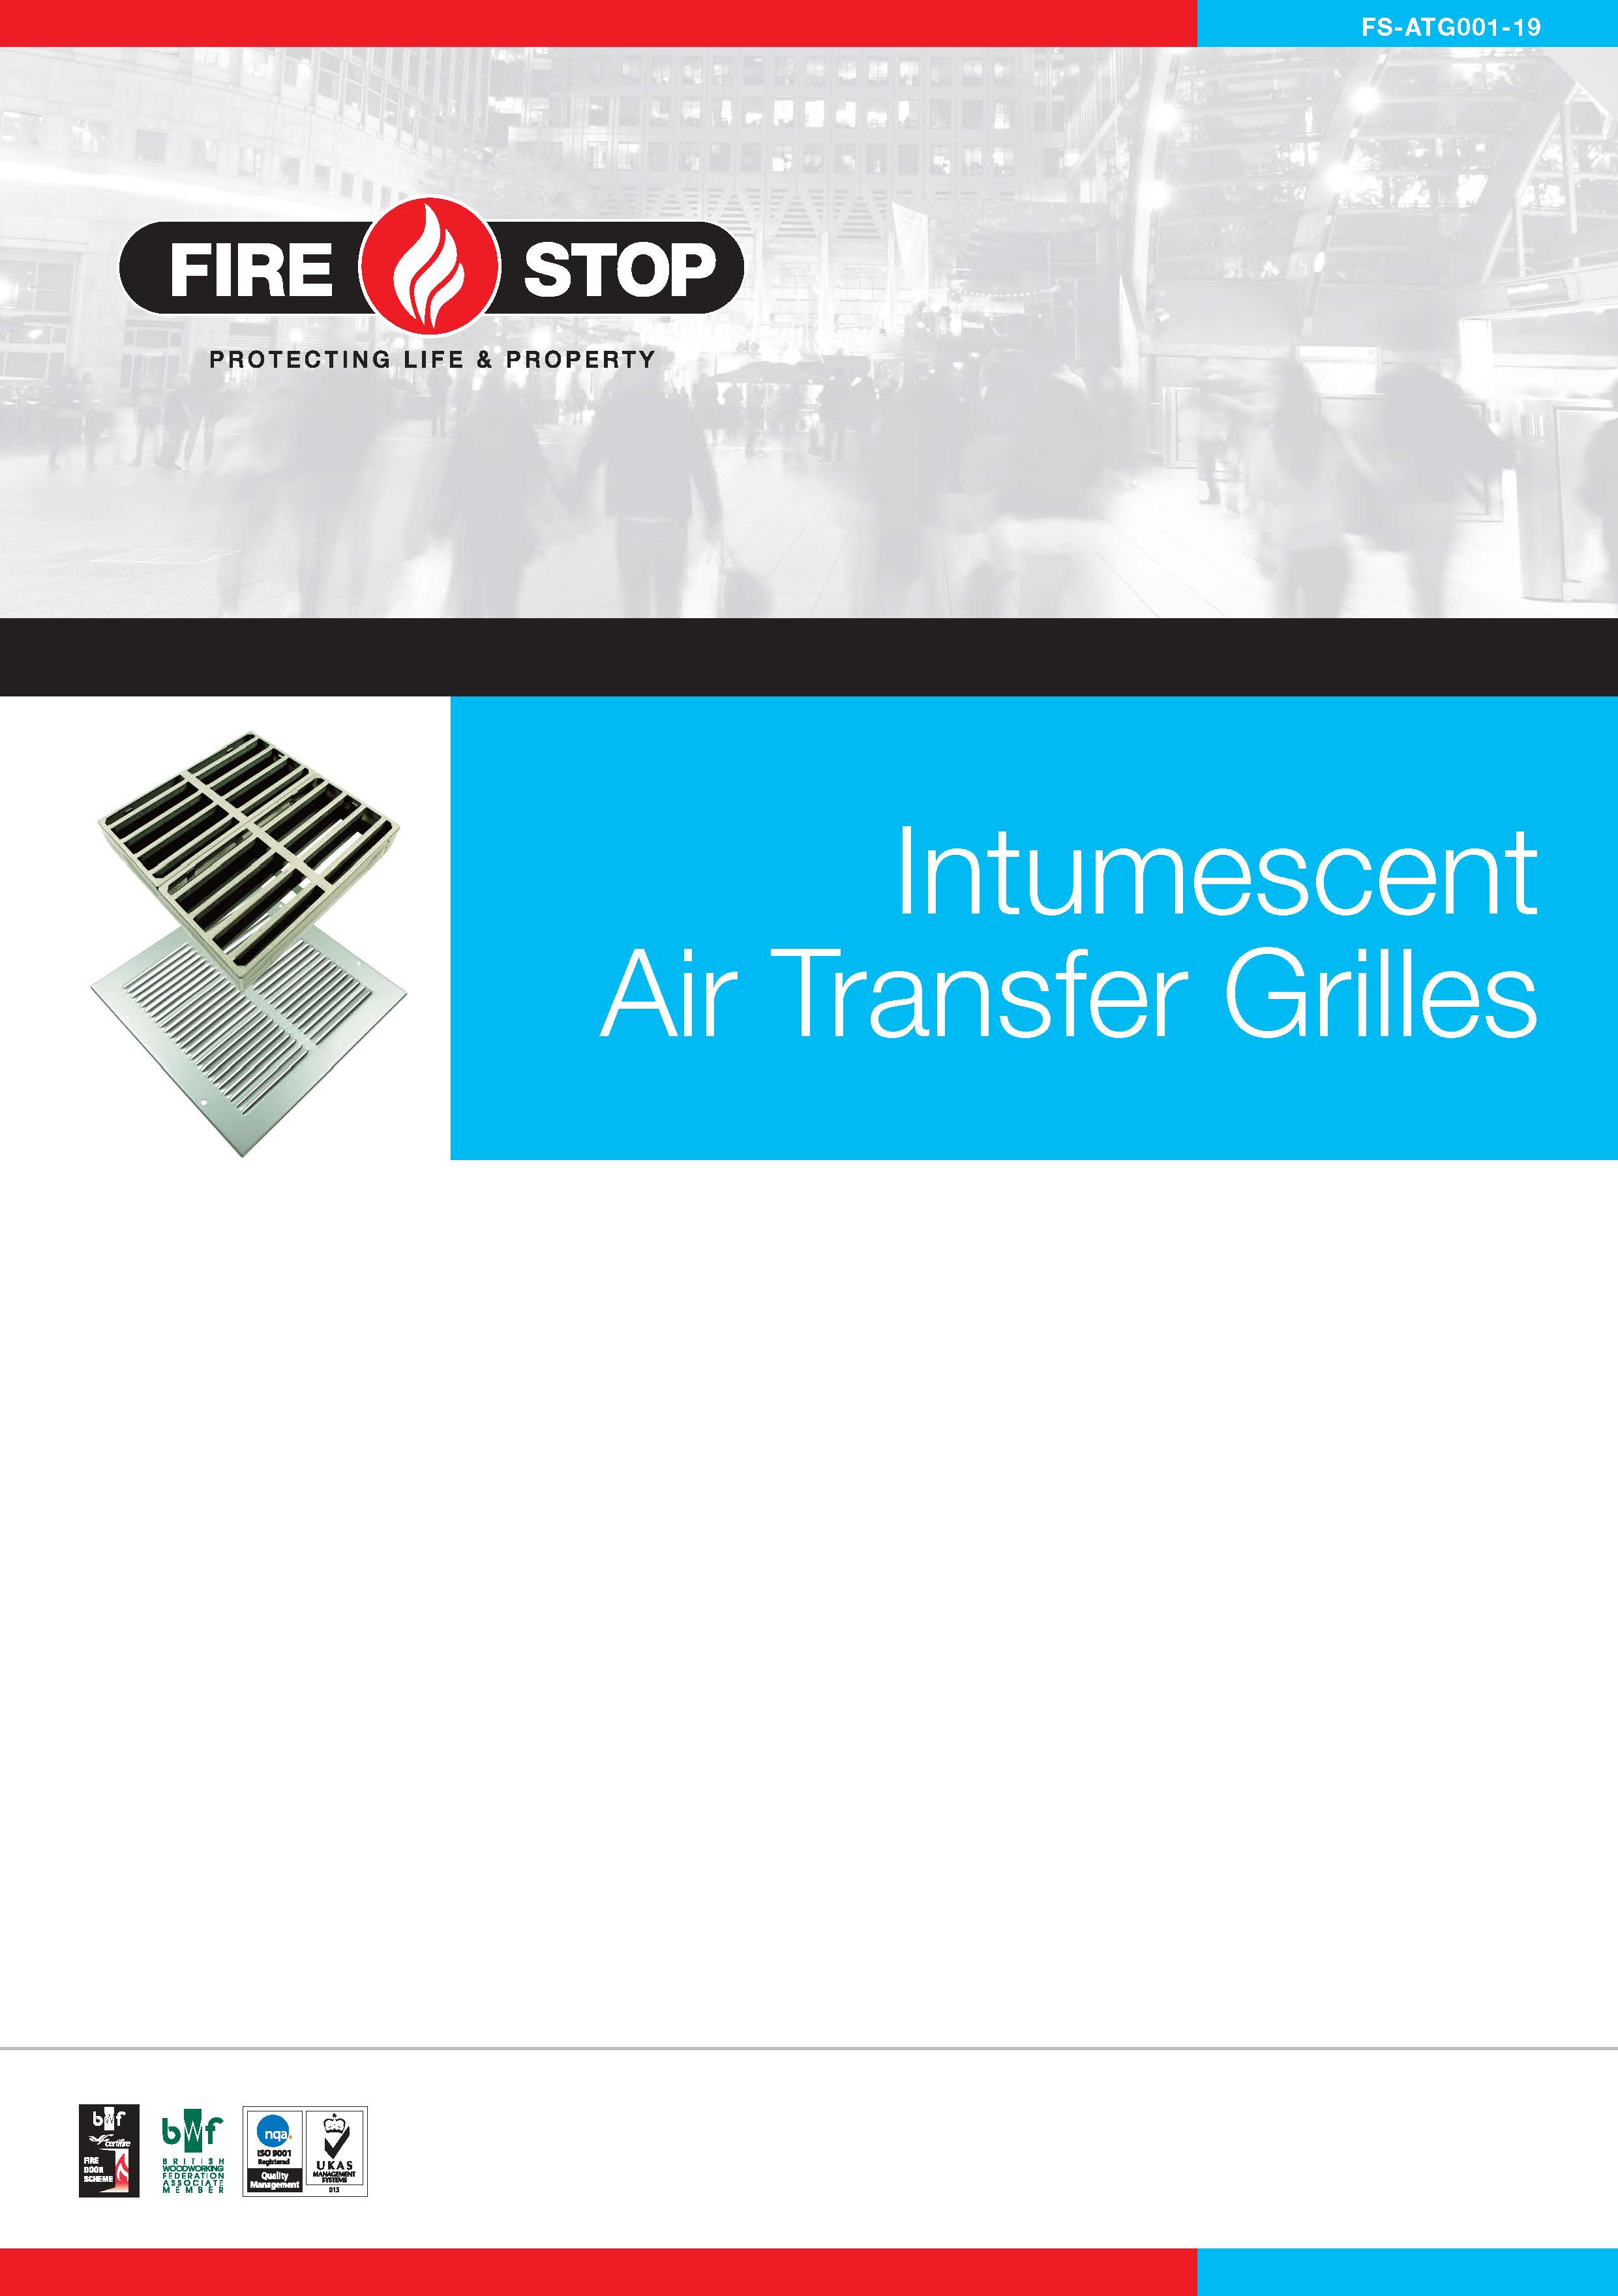 Firestop Intumescent Air Transfer Grilles brochure front page